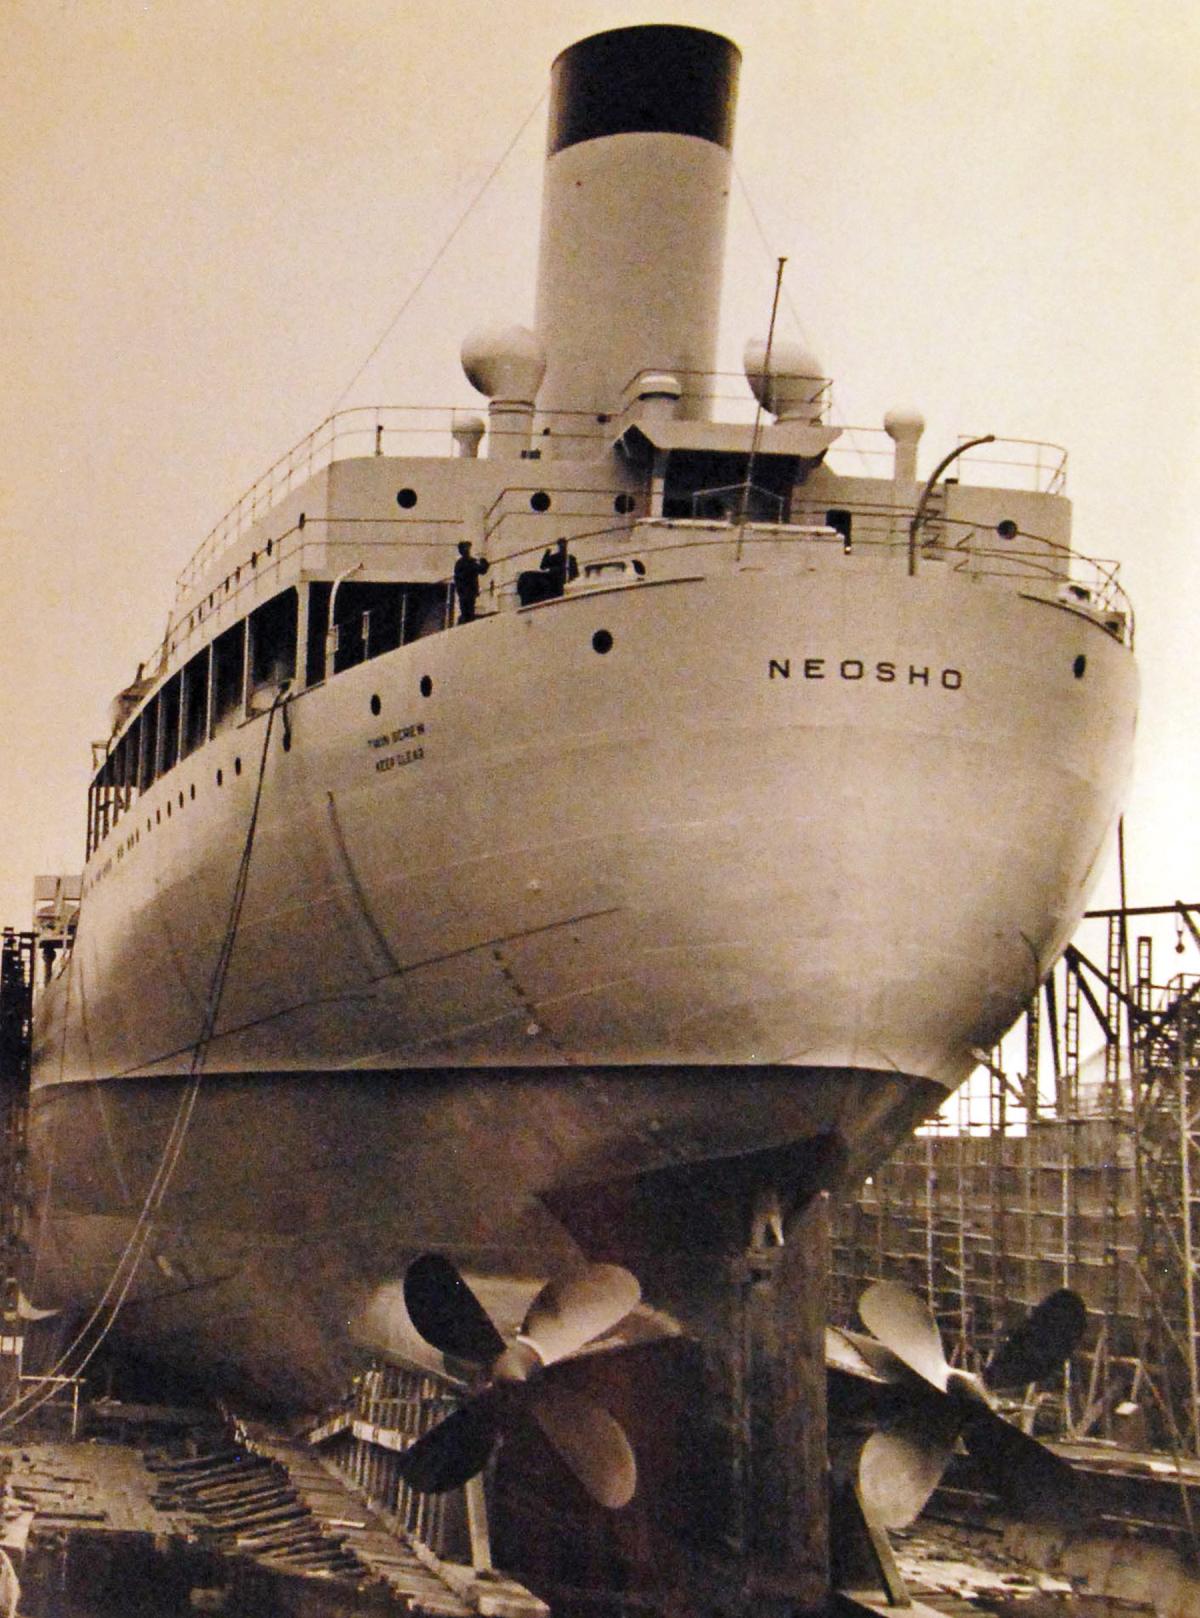 Stern view of USS Neosho (AO-23) prior to launching at Federal Shipbuilding and Drydock Company, Kearny, New Jersey, 29 April 1939